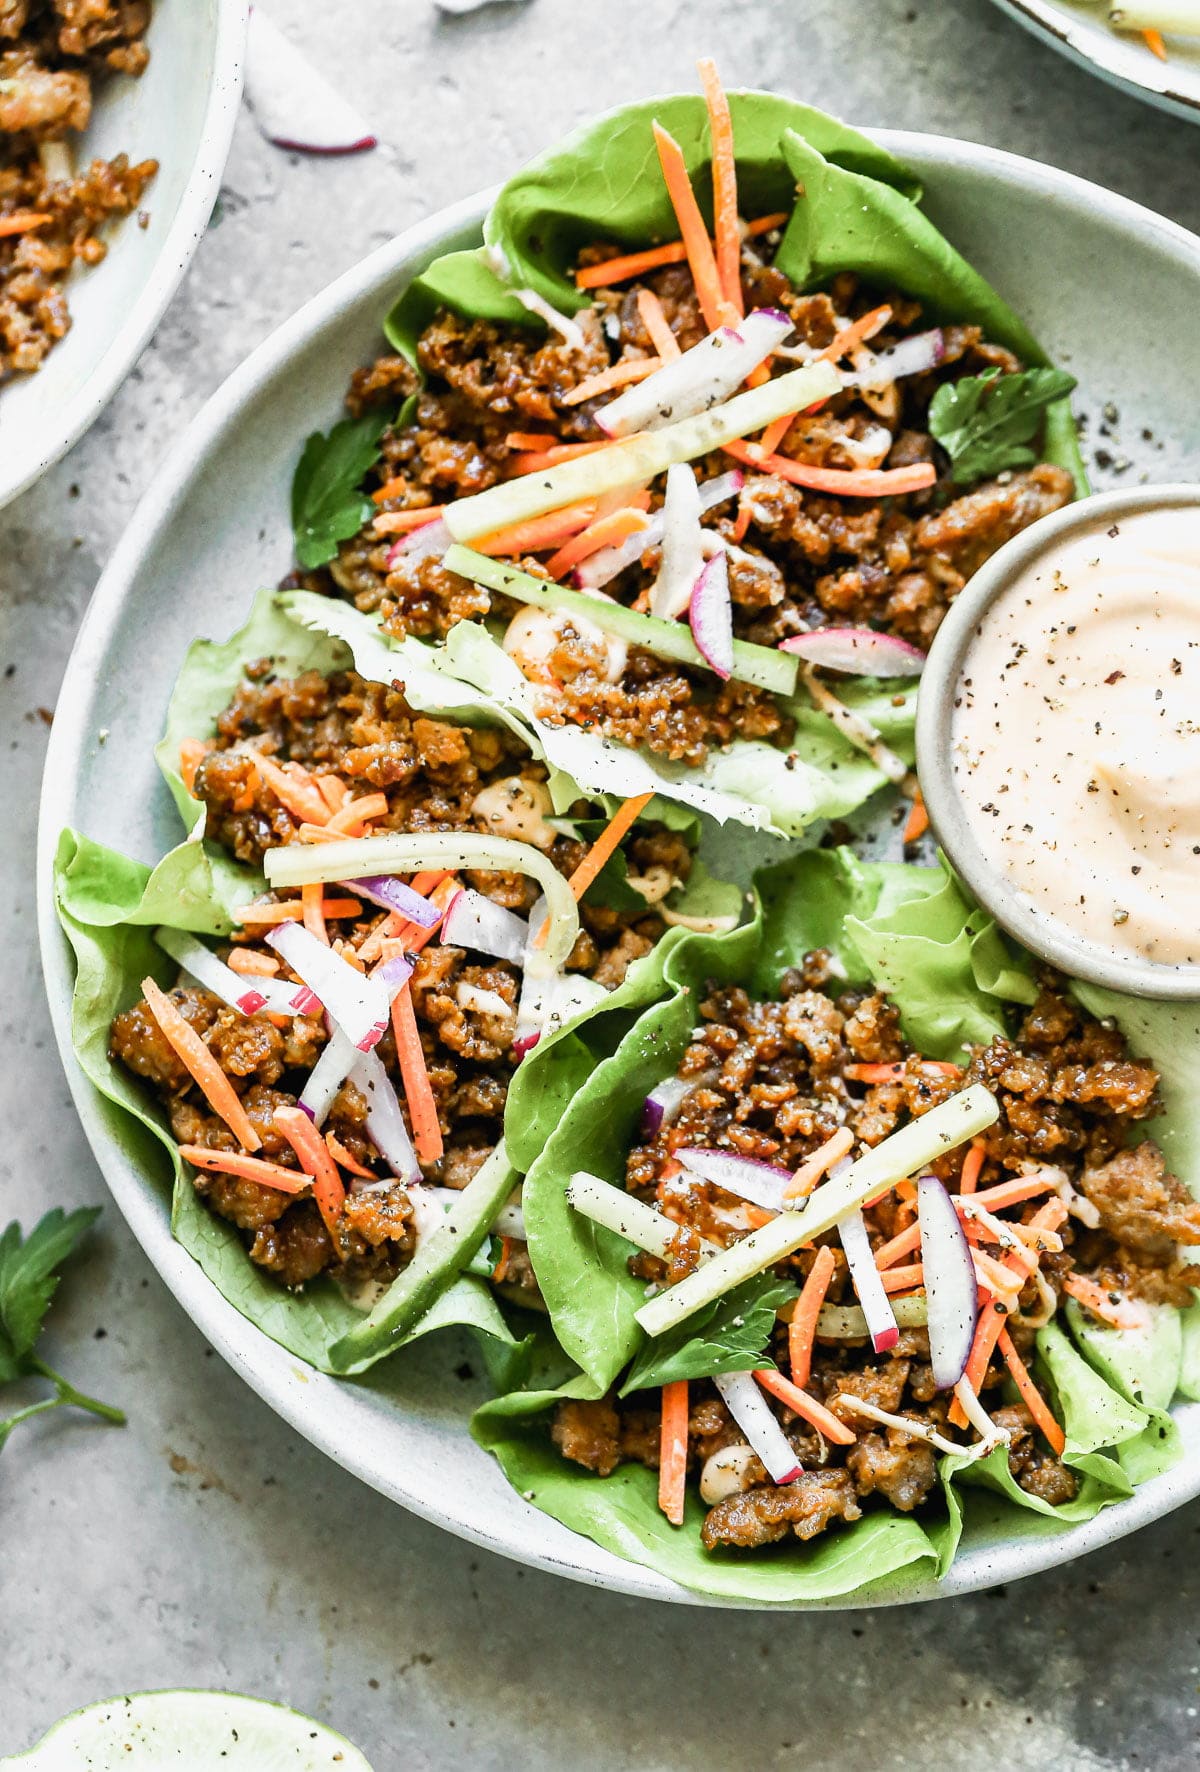 Let's take all of the flavors of a classic Banh Mi Sandwich deconstruct it and nestle everything into perfect little Vietnamese Lettuce Wraps. We will get crispy, salty ground pork, crisp veggies, with a sweet and spicy mayo drizzle in each drippy bite we take. And we will be happy. 